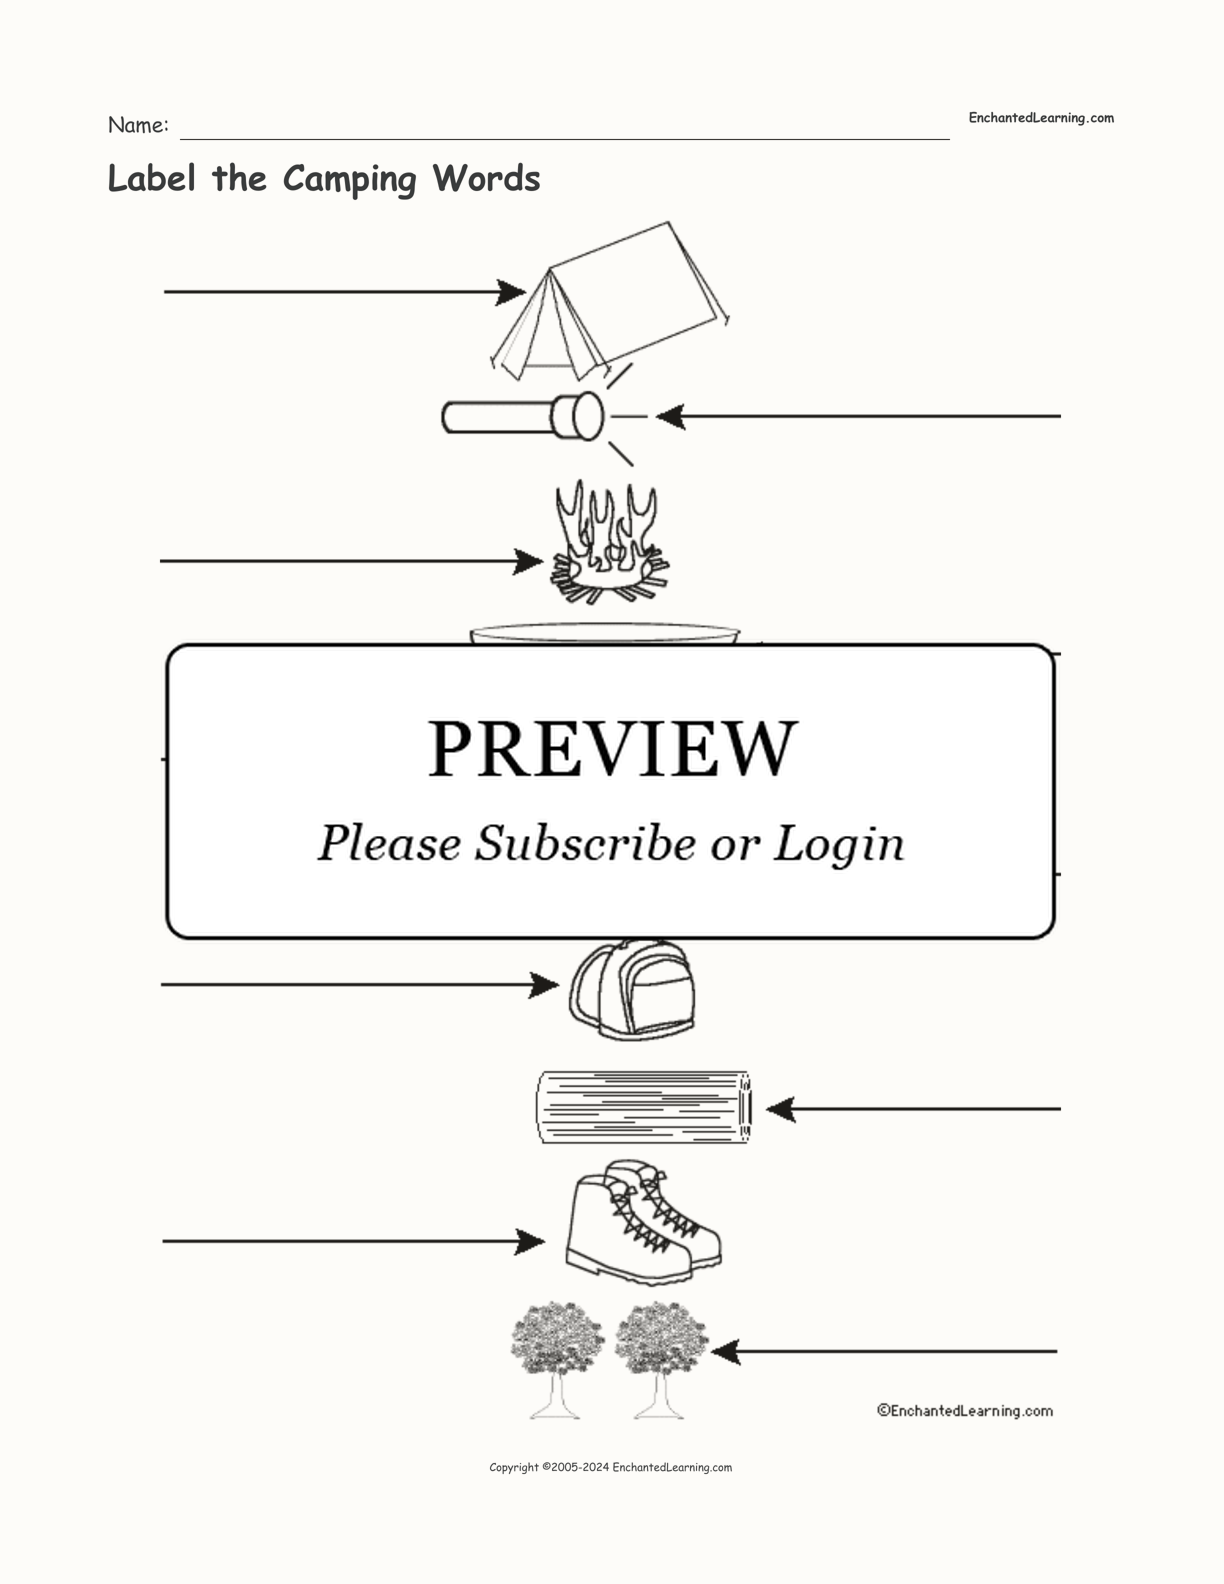 Label the Camping Words interactive worksheet page 1